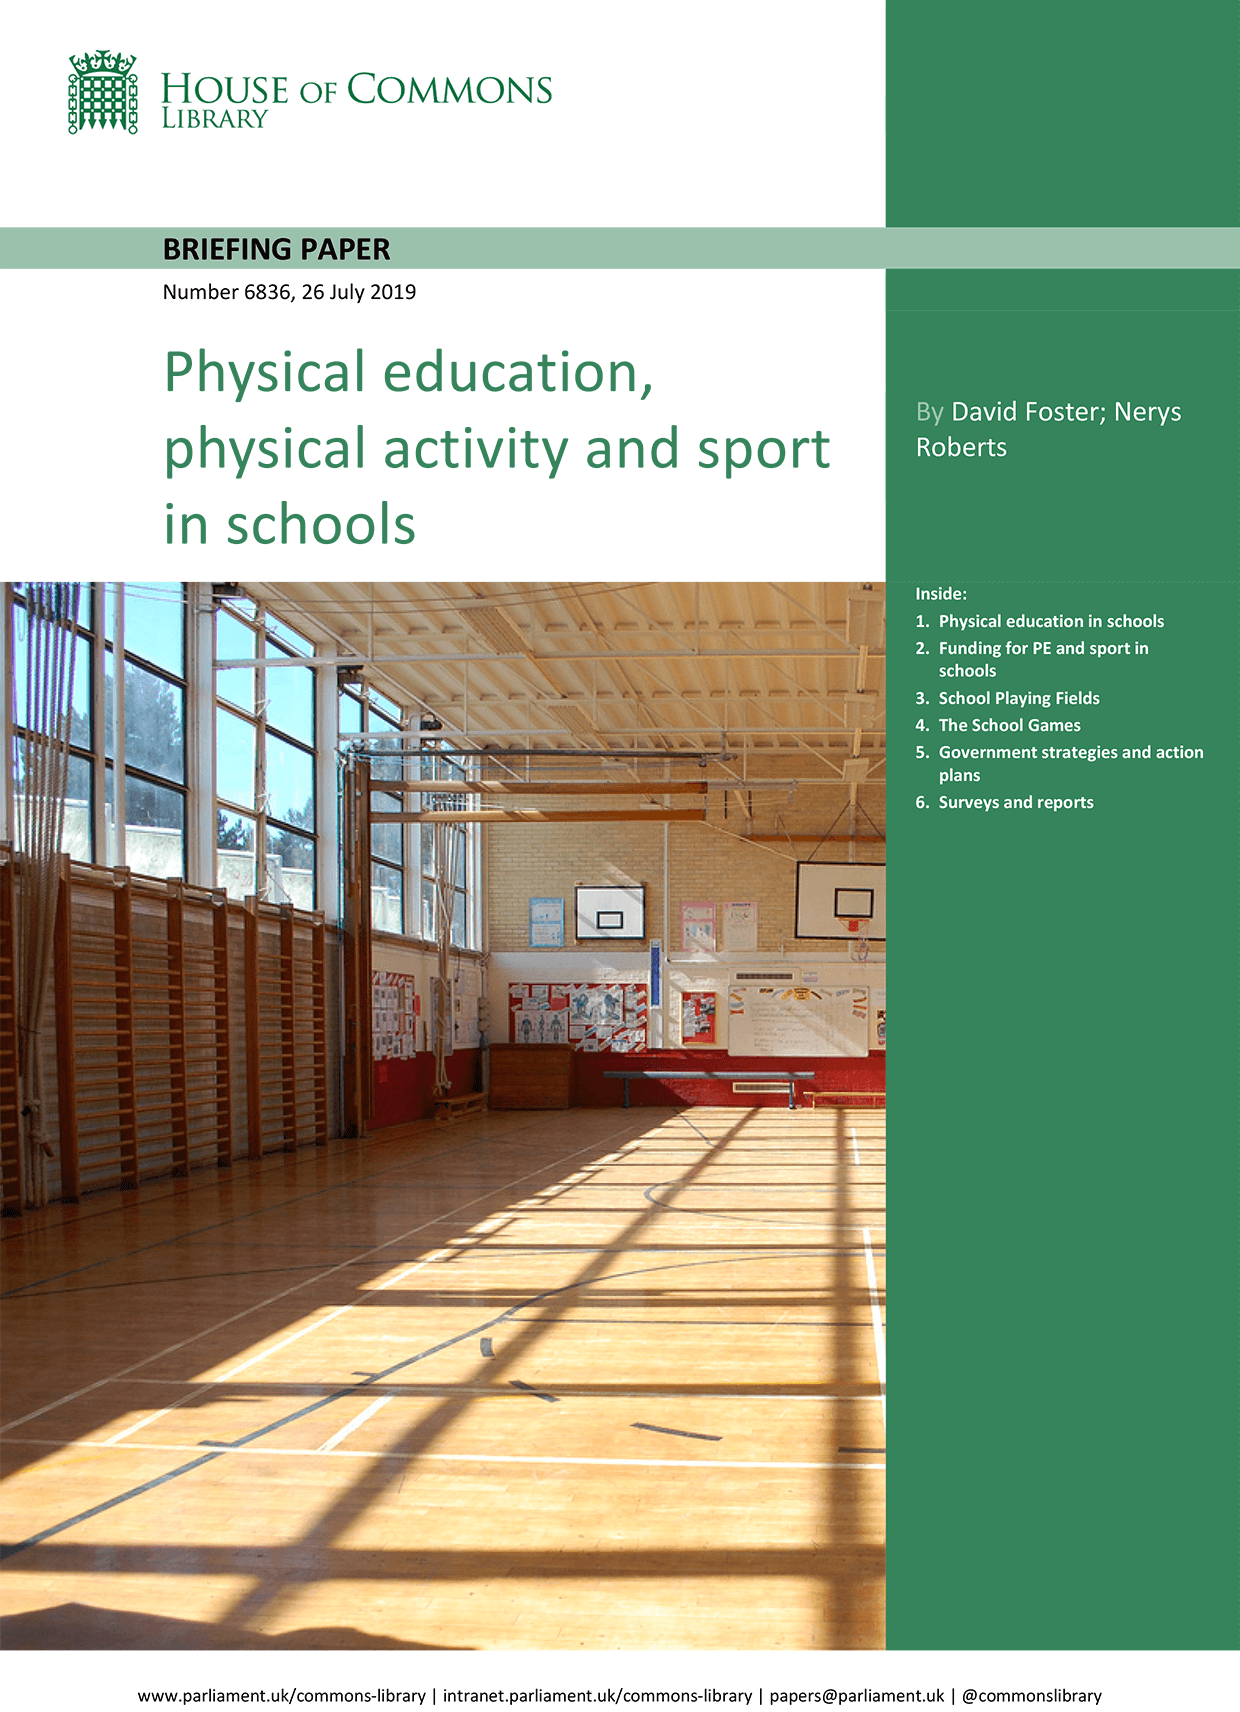 Physical education, physical activity and school sport